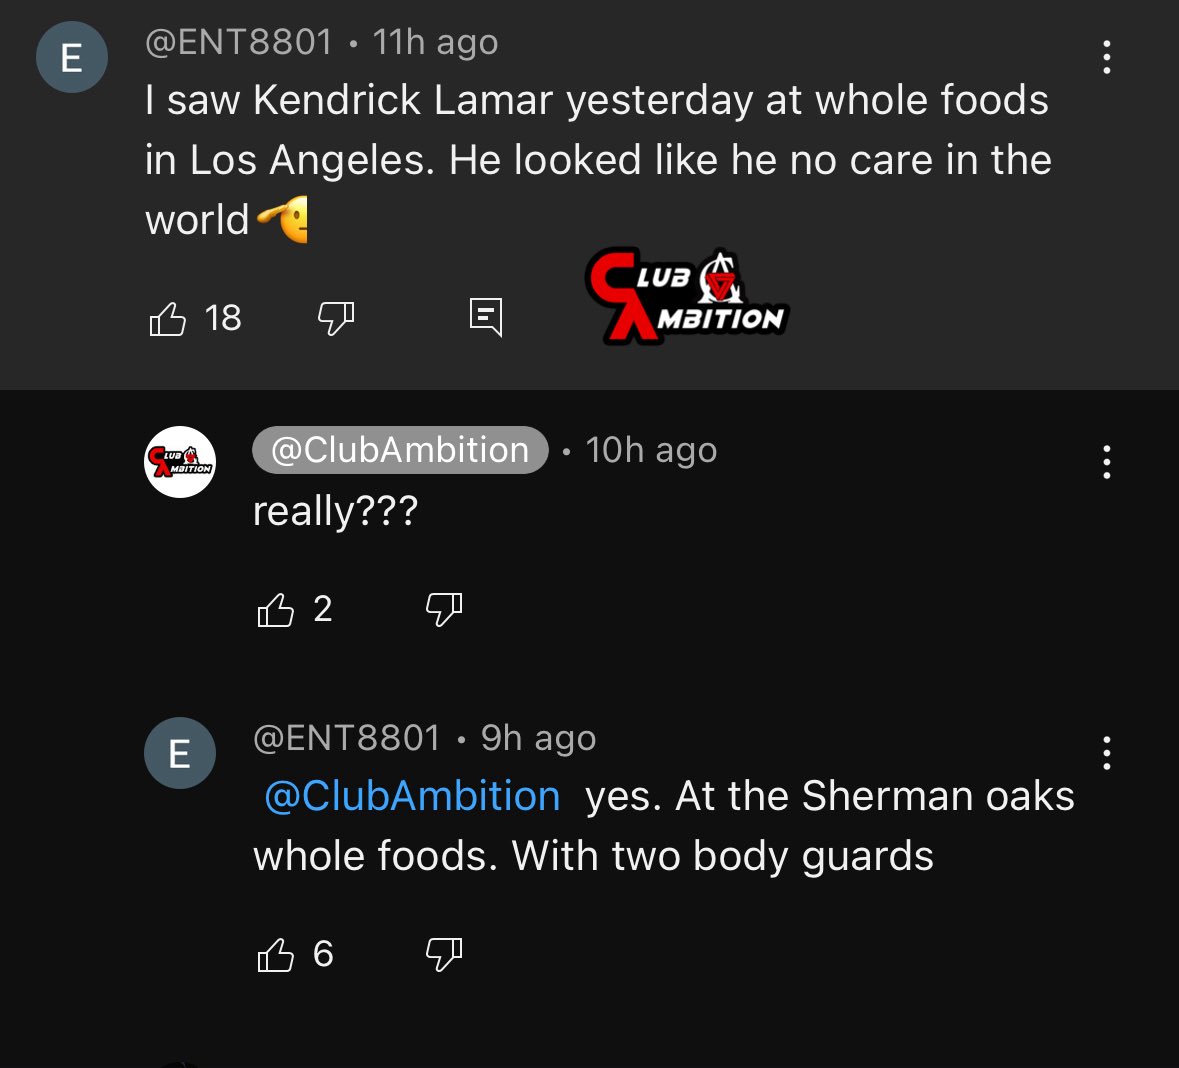 i forgot to post this, one of my subscribers said last weekend they saw Kendrick Lamar out grocery shopping at Whole Foods in LA, with bodyguards